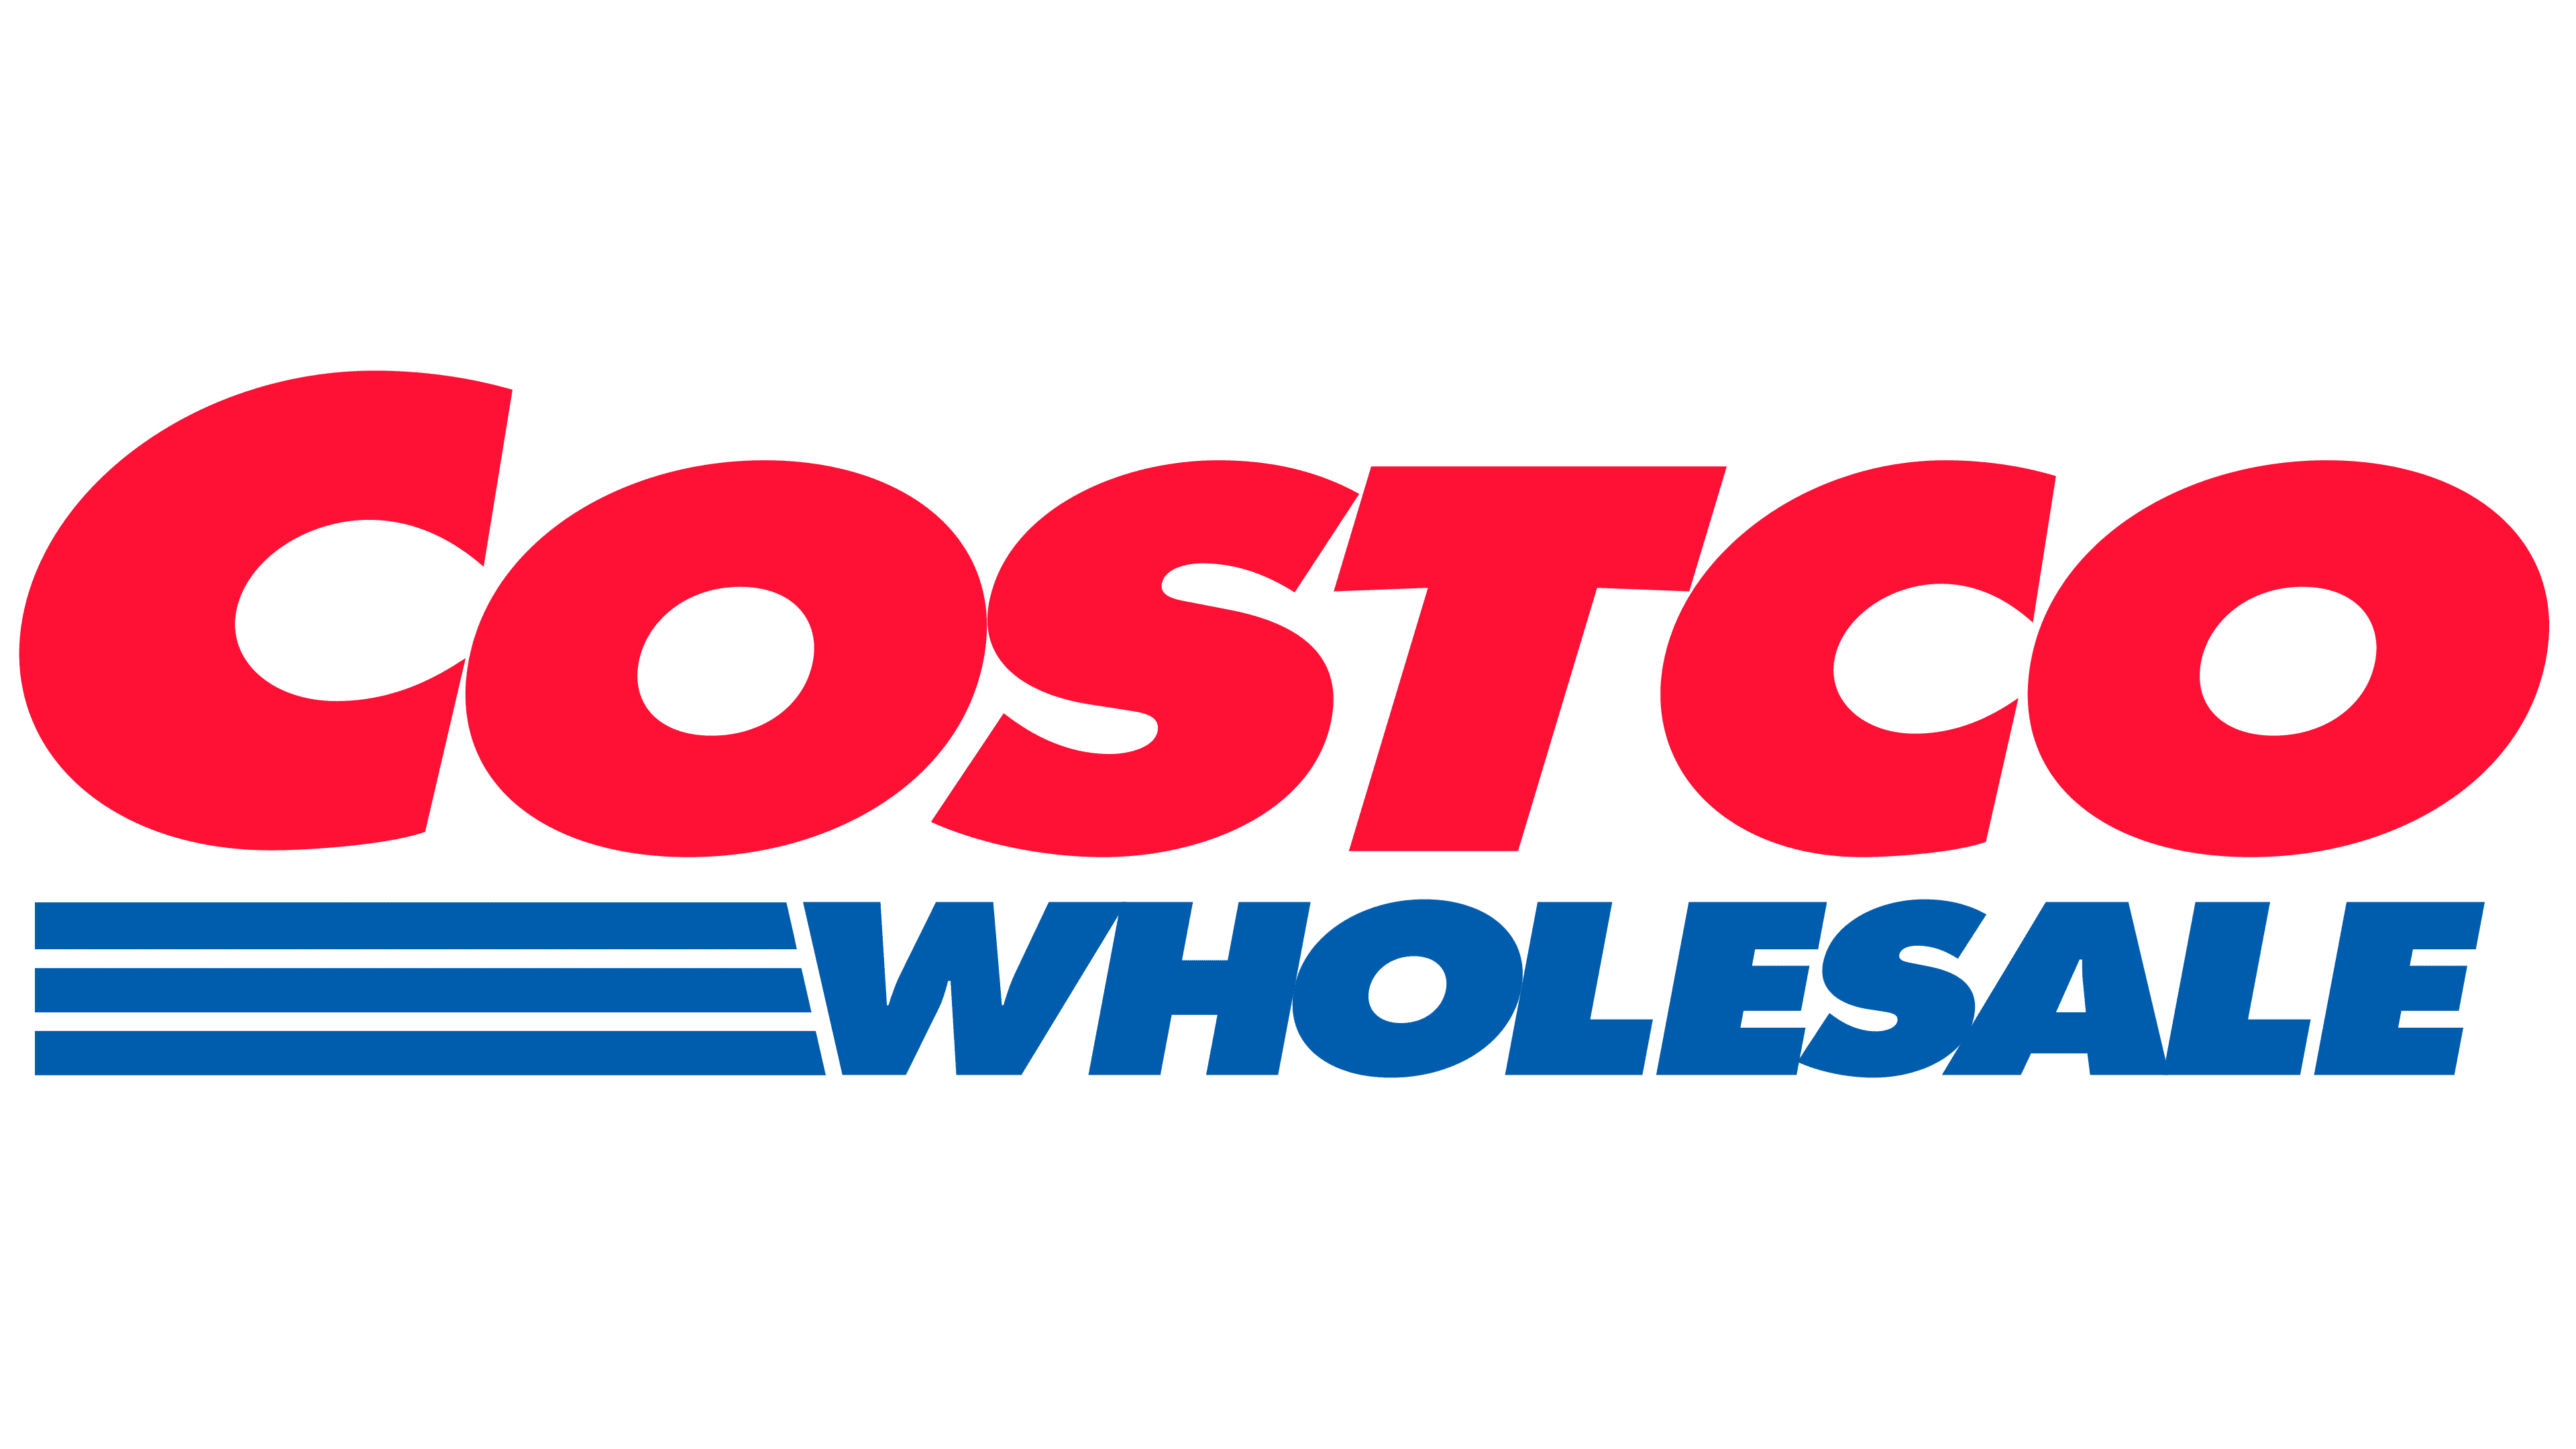 Costco Logo | The most famous brands and company logos in the world